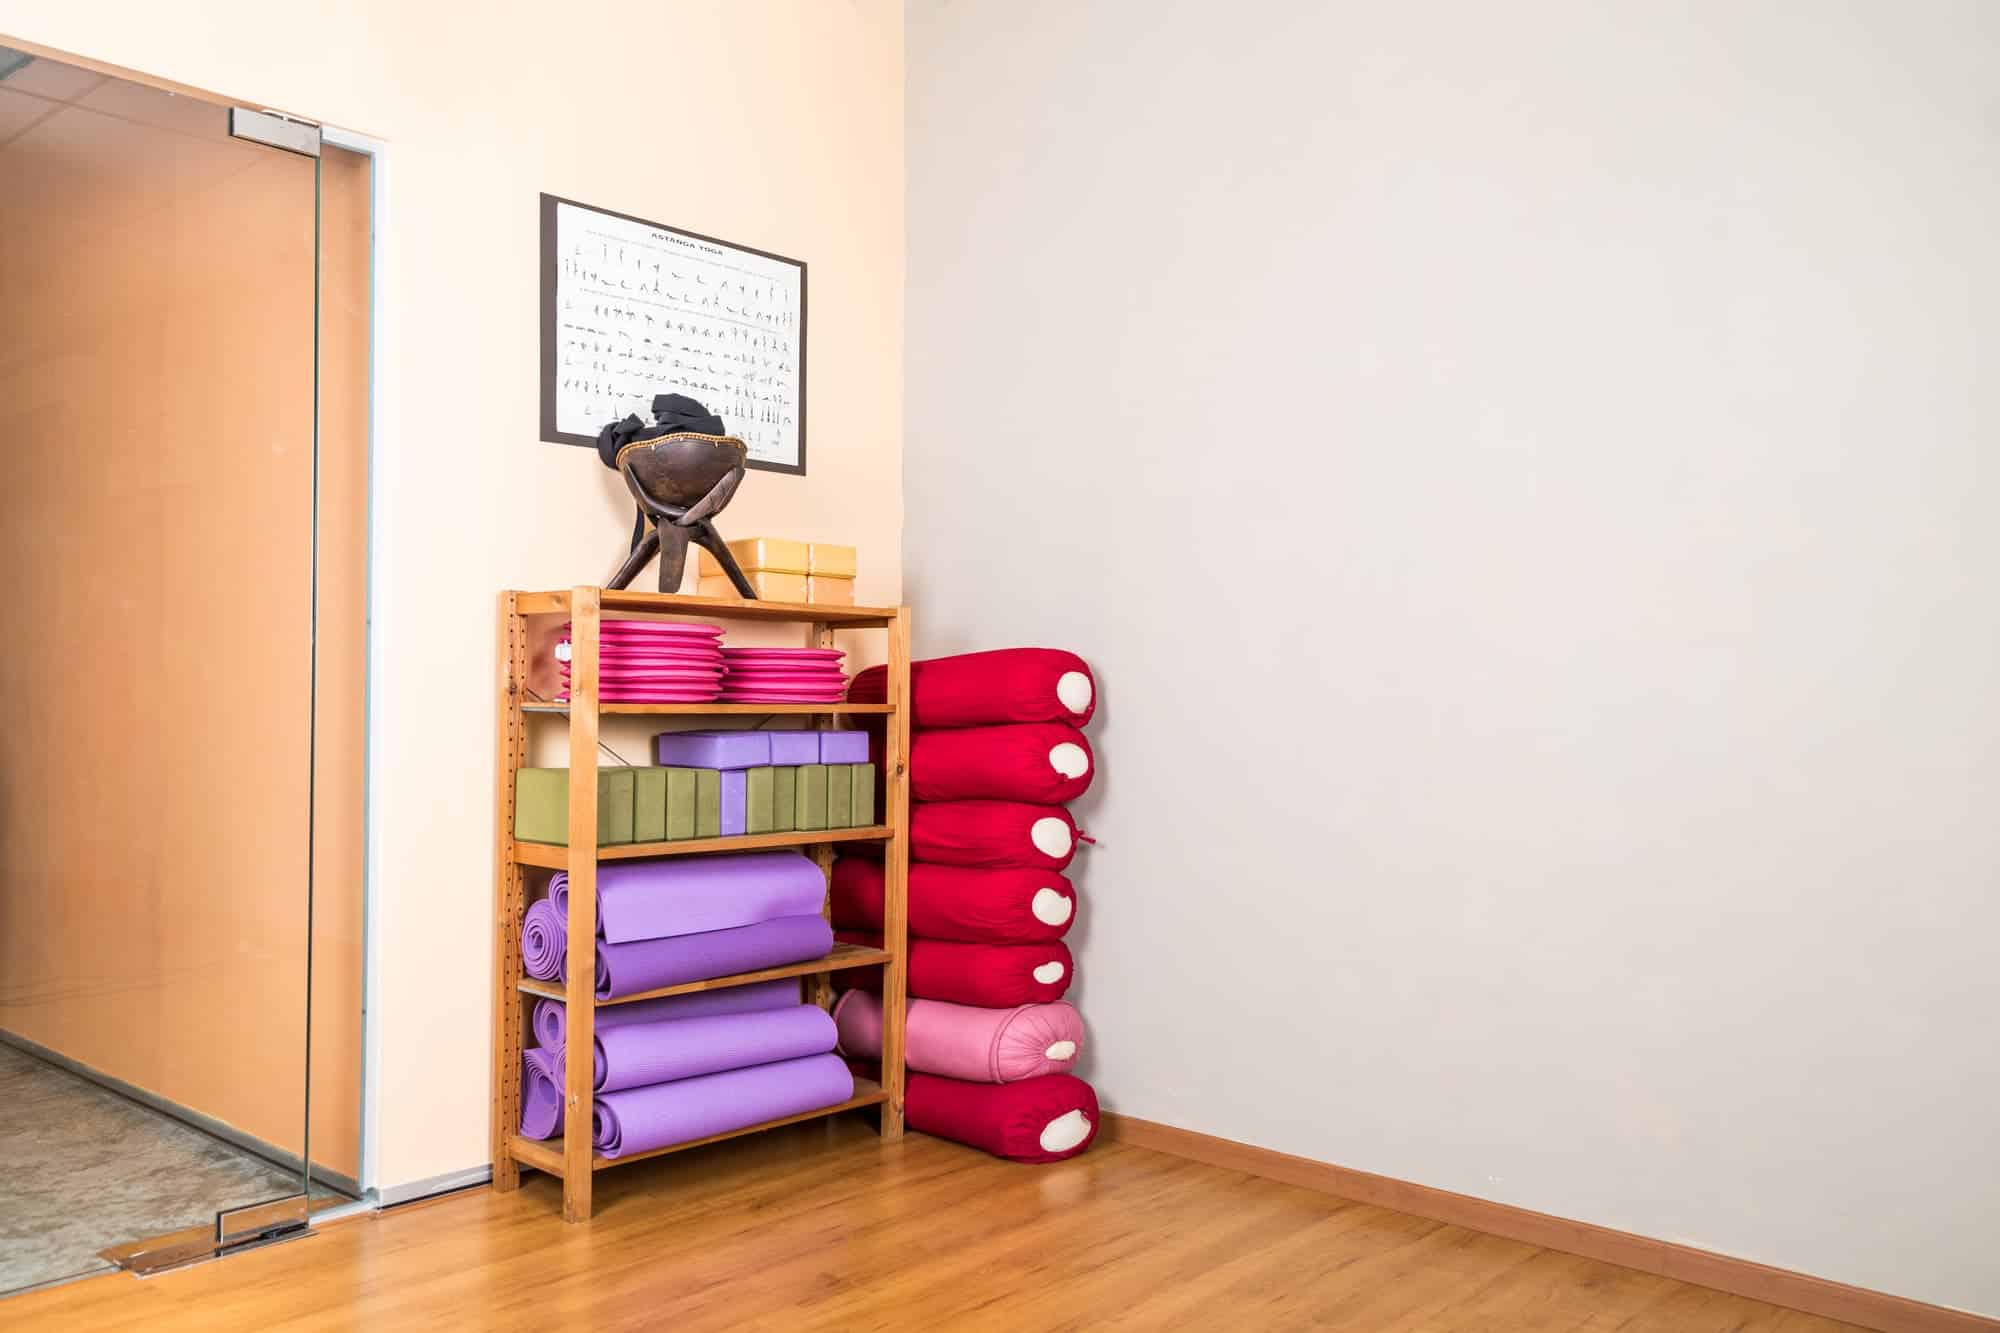 Yoga blocks, pillow, mats, pads, accessories stacked in empty yoga studio with wooden flooring